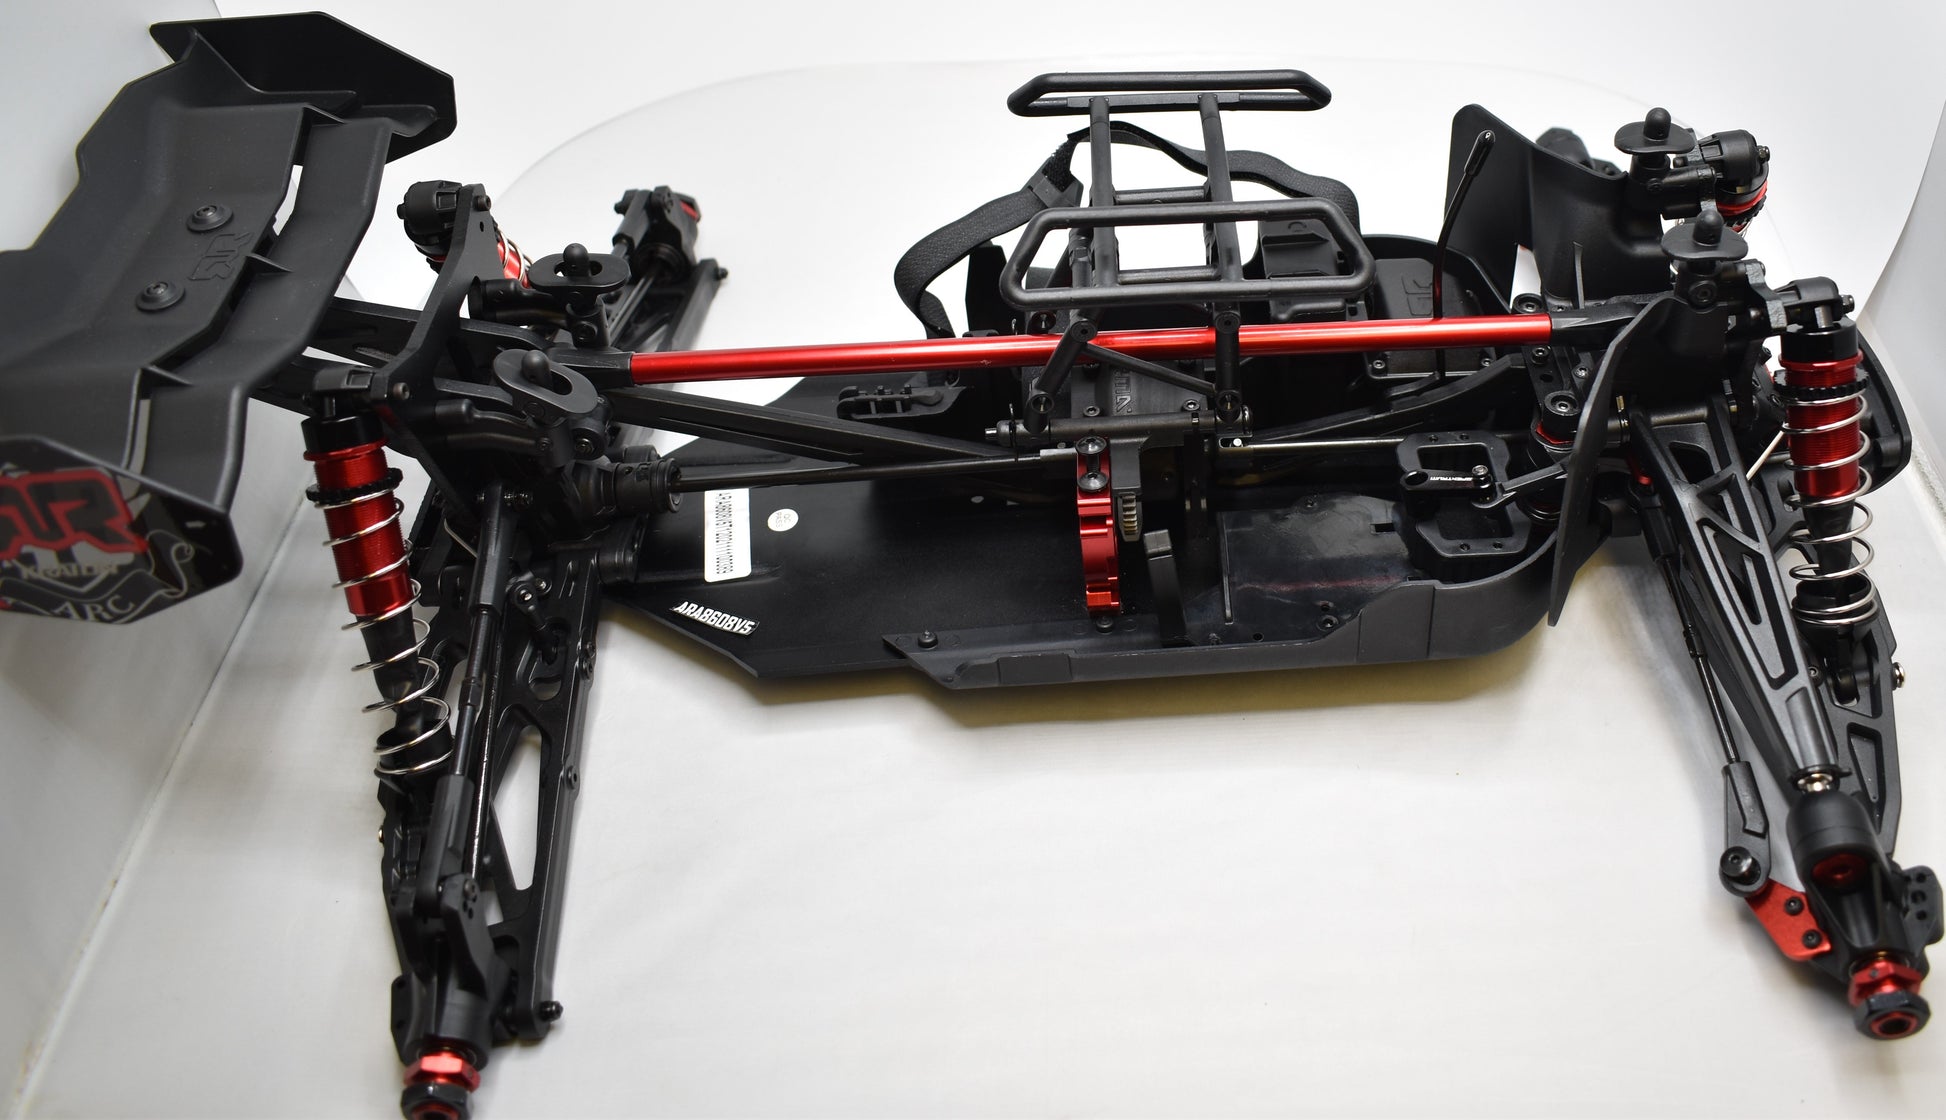 Arrma 1/8 KRATON 6S 4WD BLX Roller Slider Chassis - Dirt Cheap RC SAVING YOU MONEY, ONE PART AT A TIME